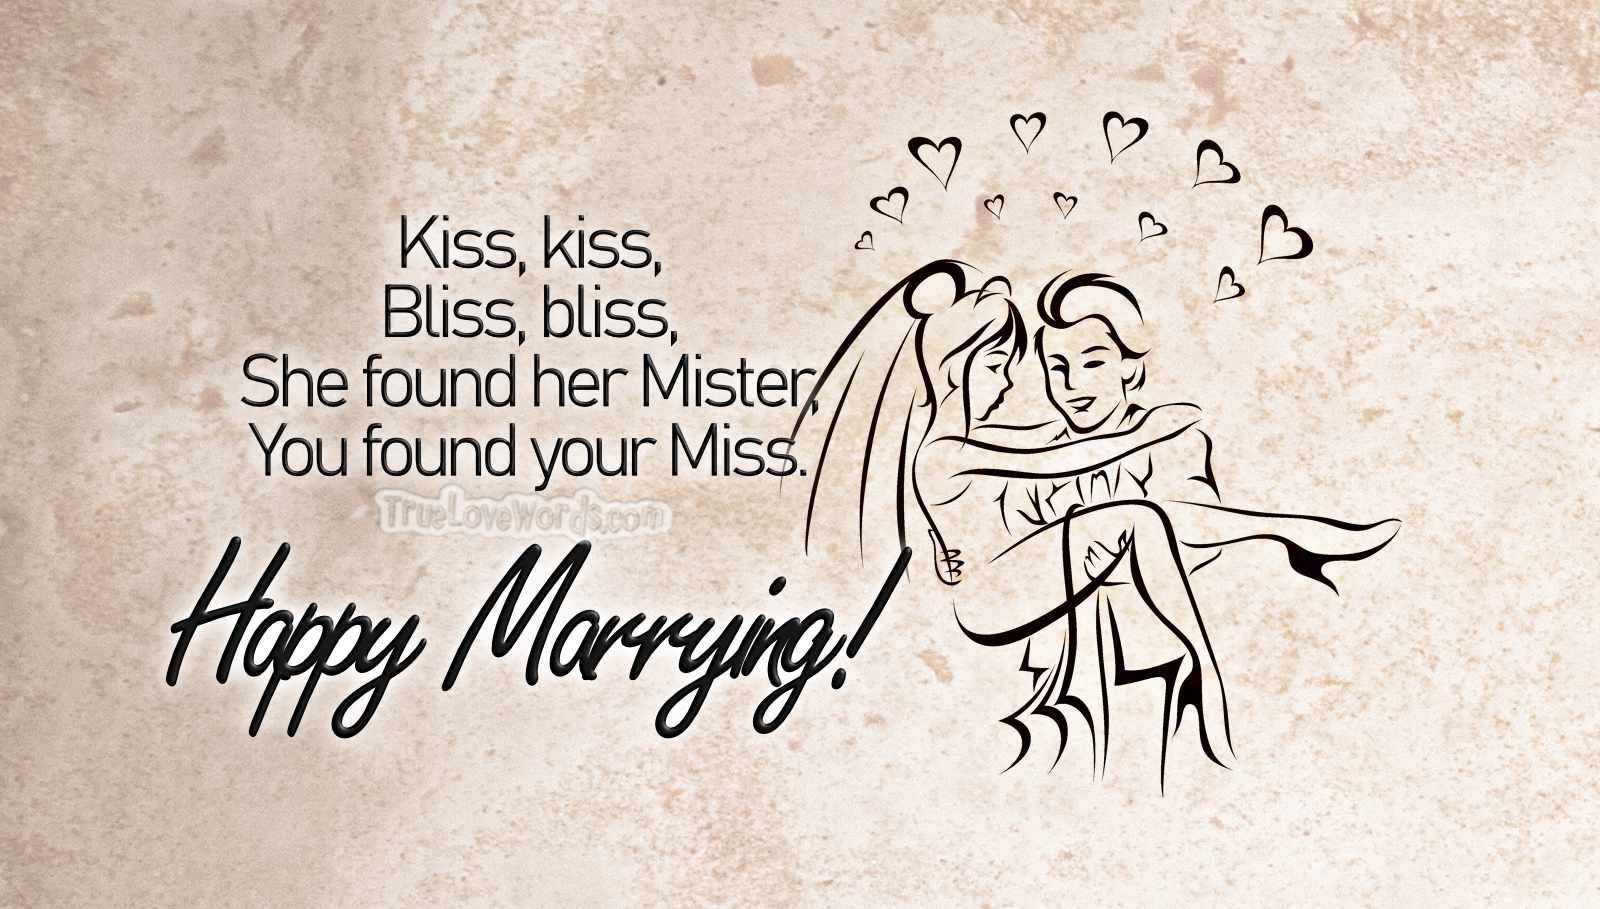 Funny Wedding Wishes For Your Loved Ones » True Love Words